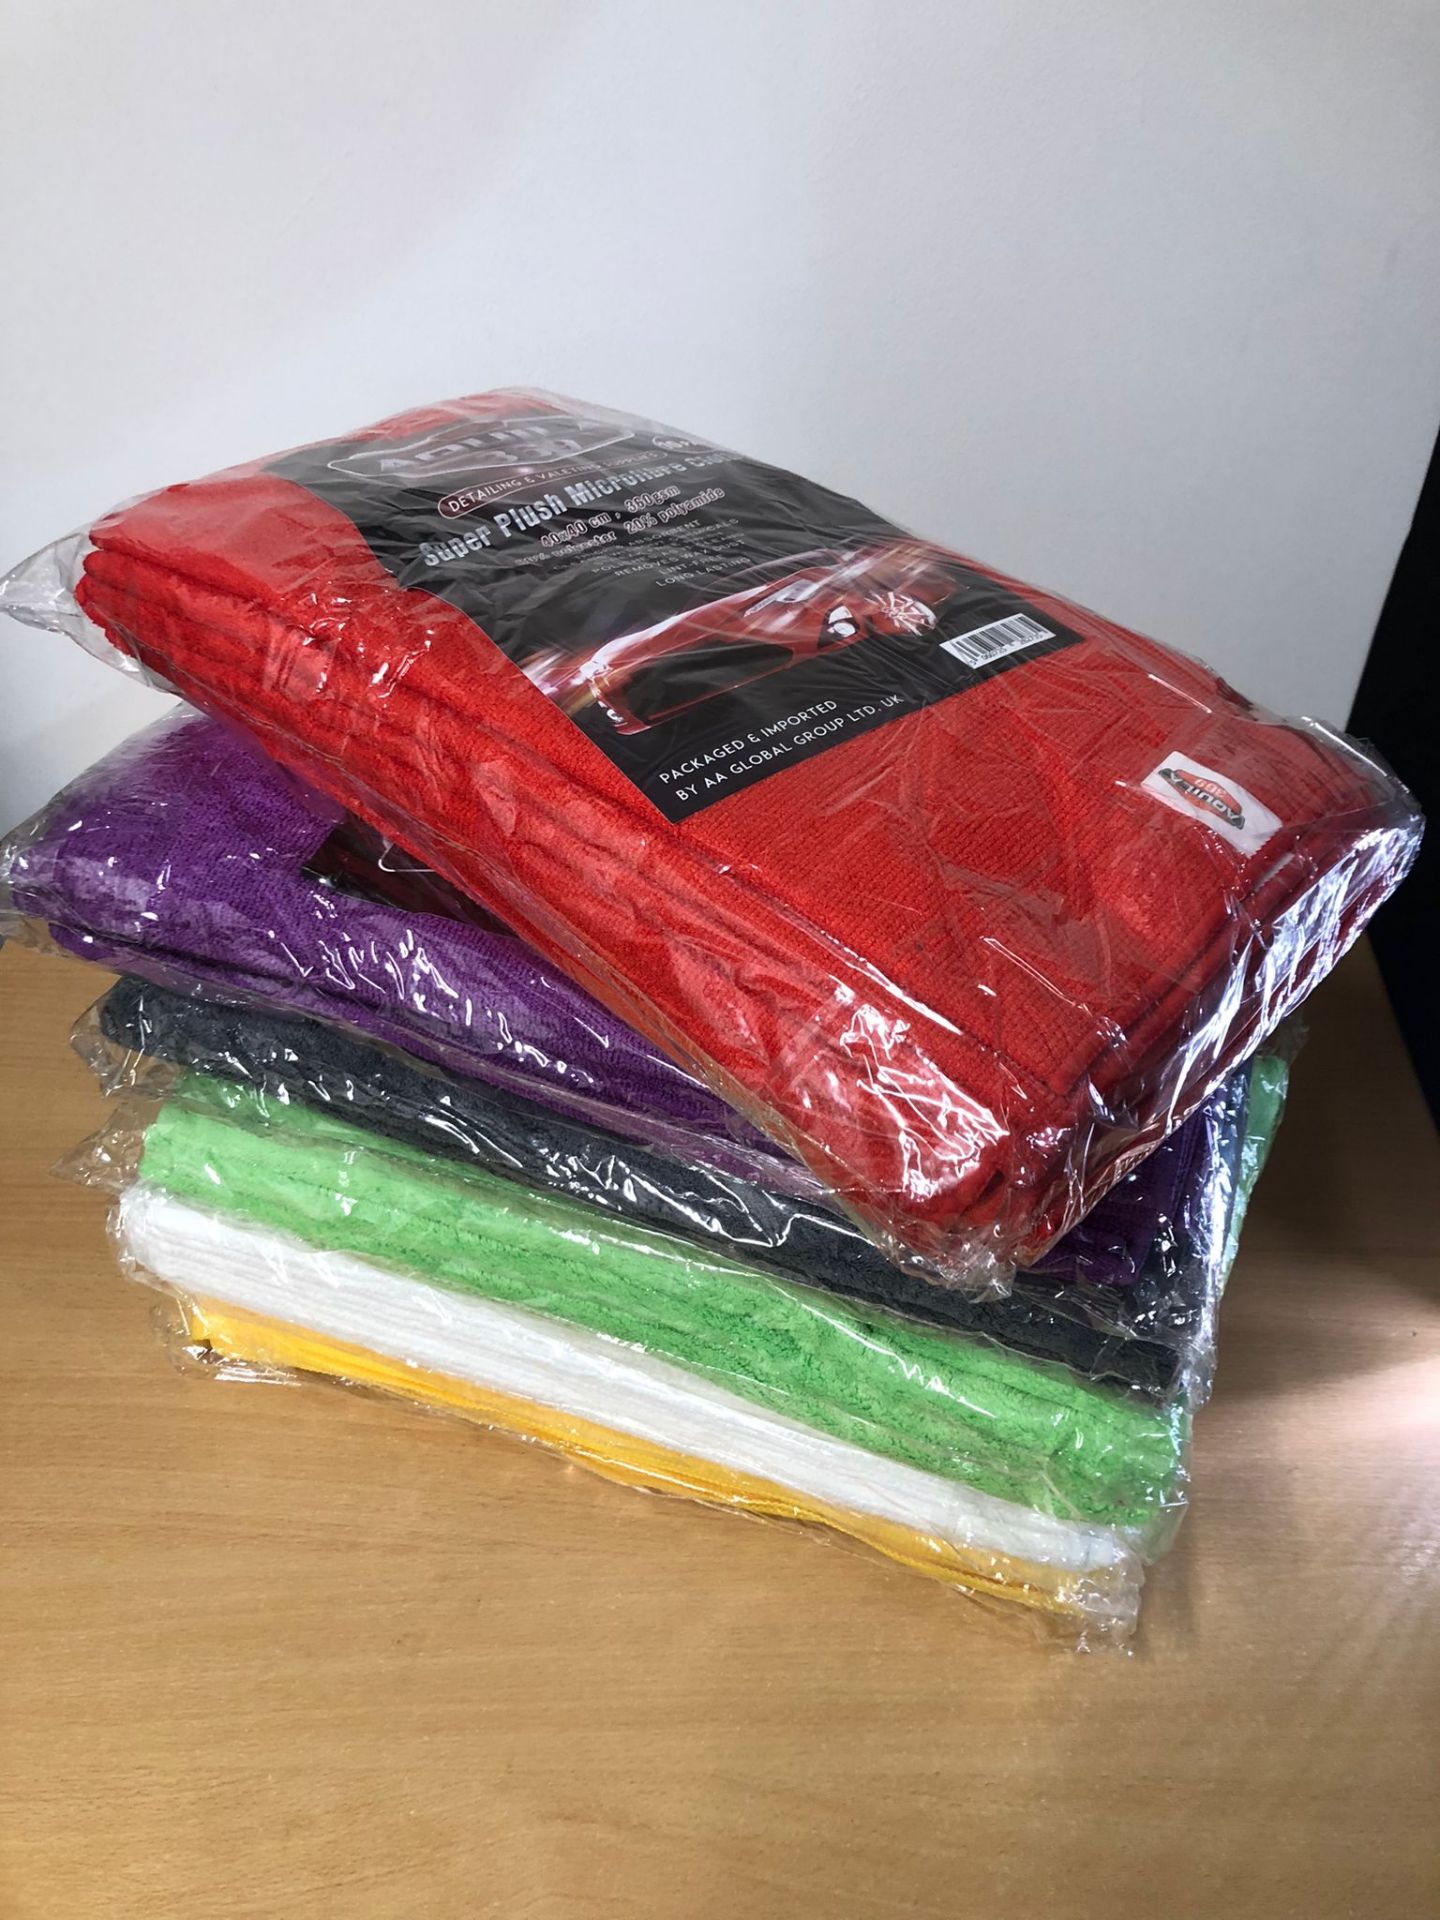 6 Packs of Detailing and Valeting Microfibre Cleaning Cloths Brand New - Image 9 of 9